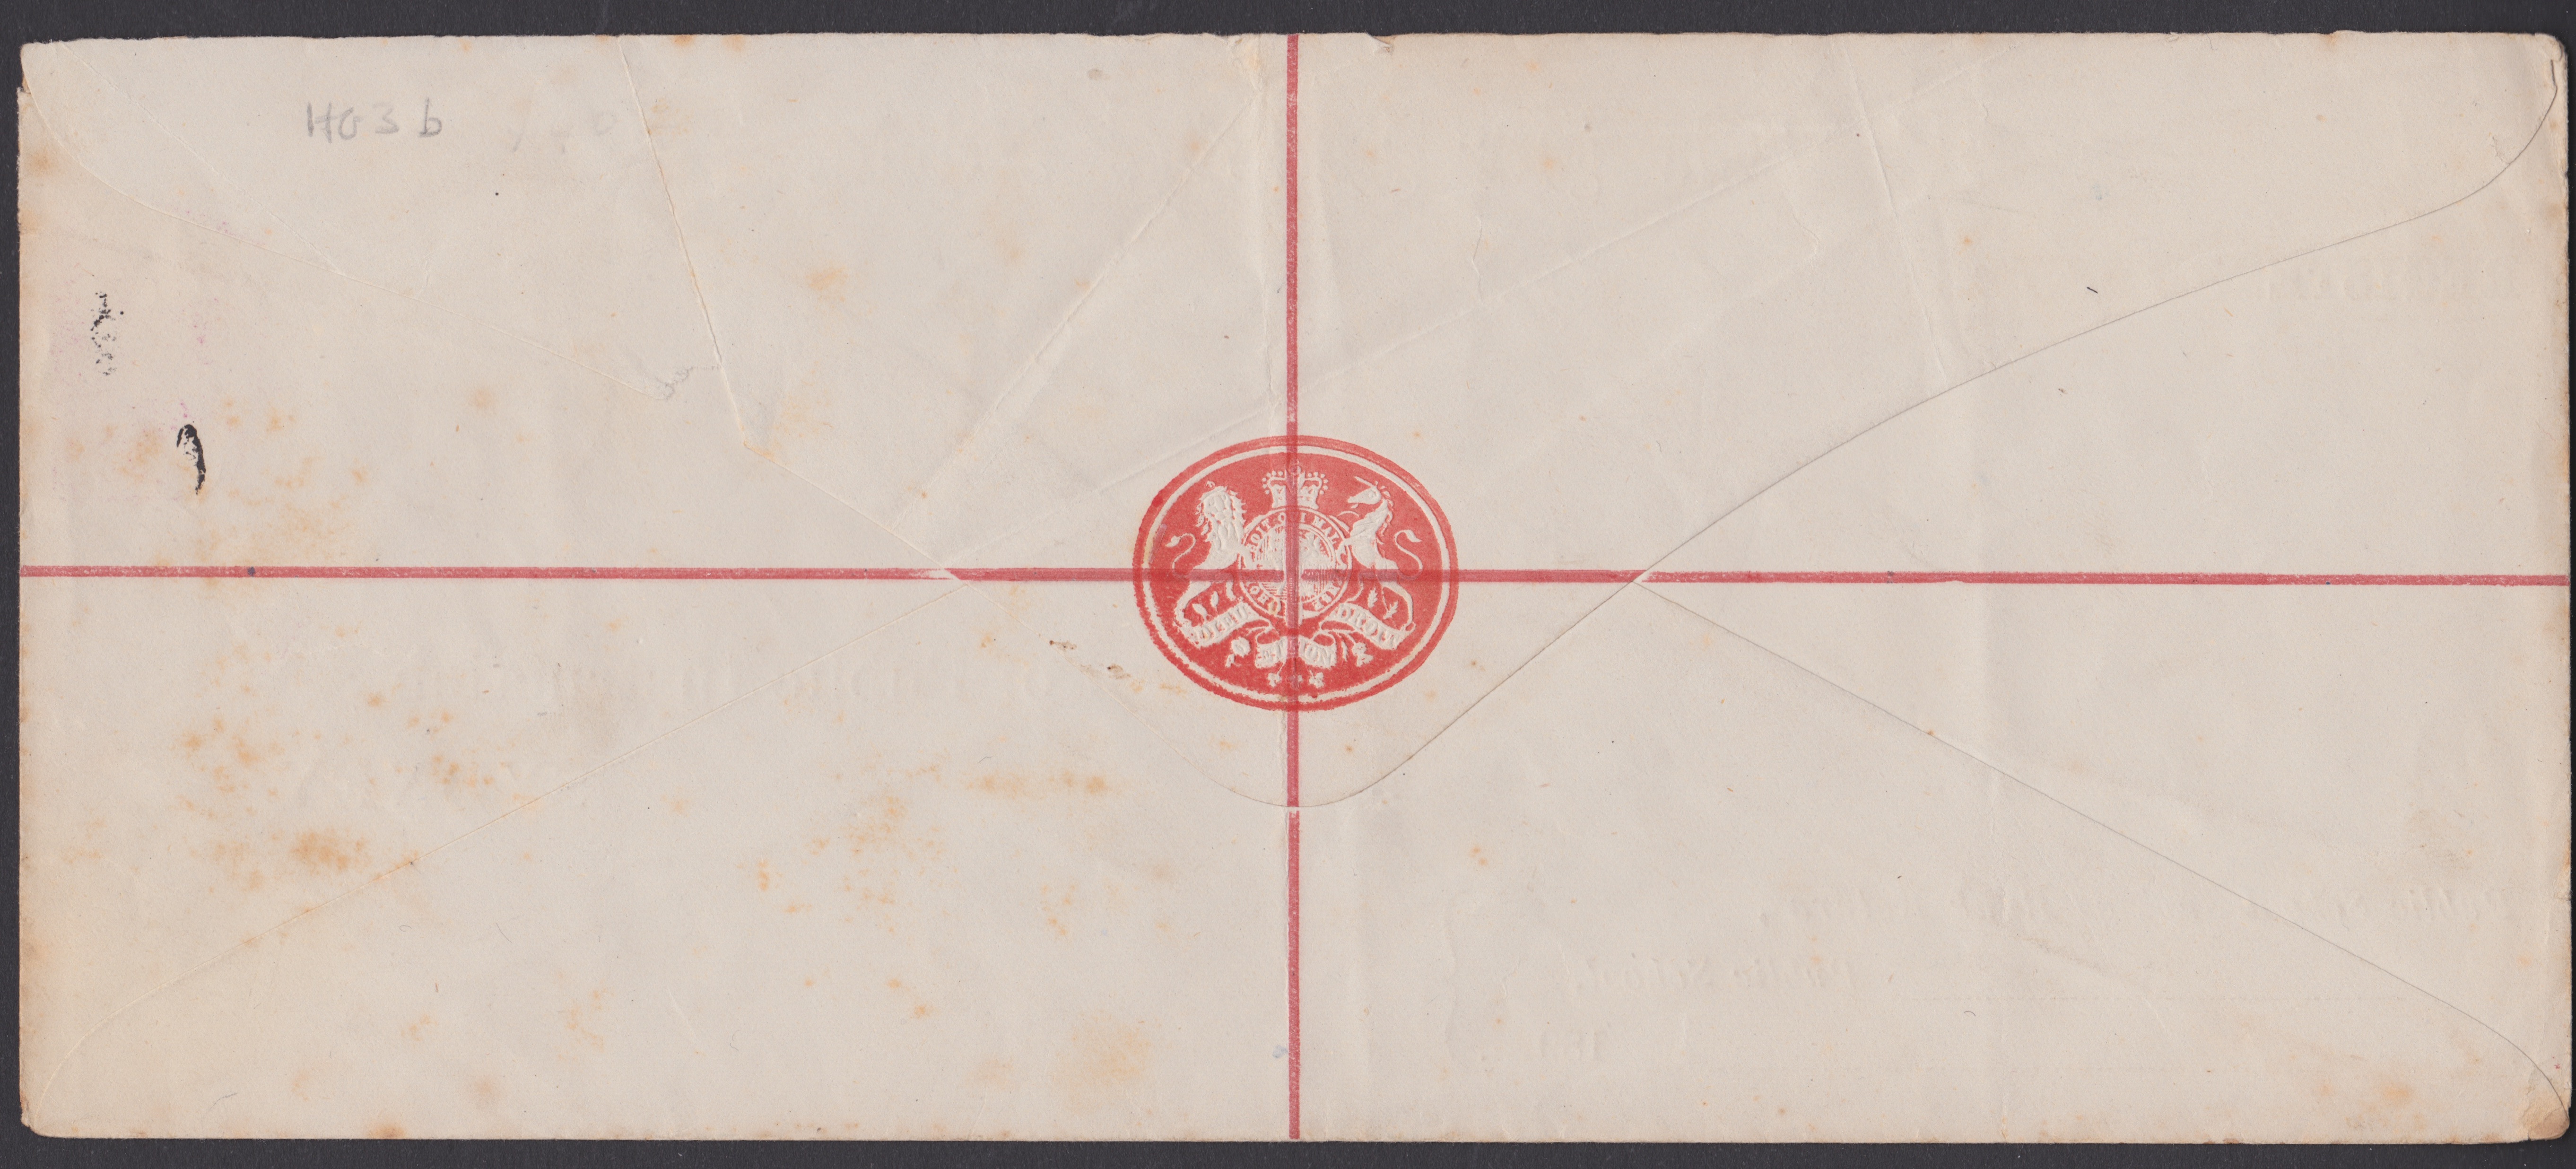 NEW SOUTH WALES 1892 - 6d OHMS postal stationery registration envelope from the Savings bank at - Image 2 of 2